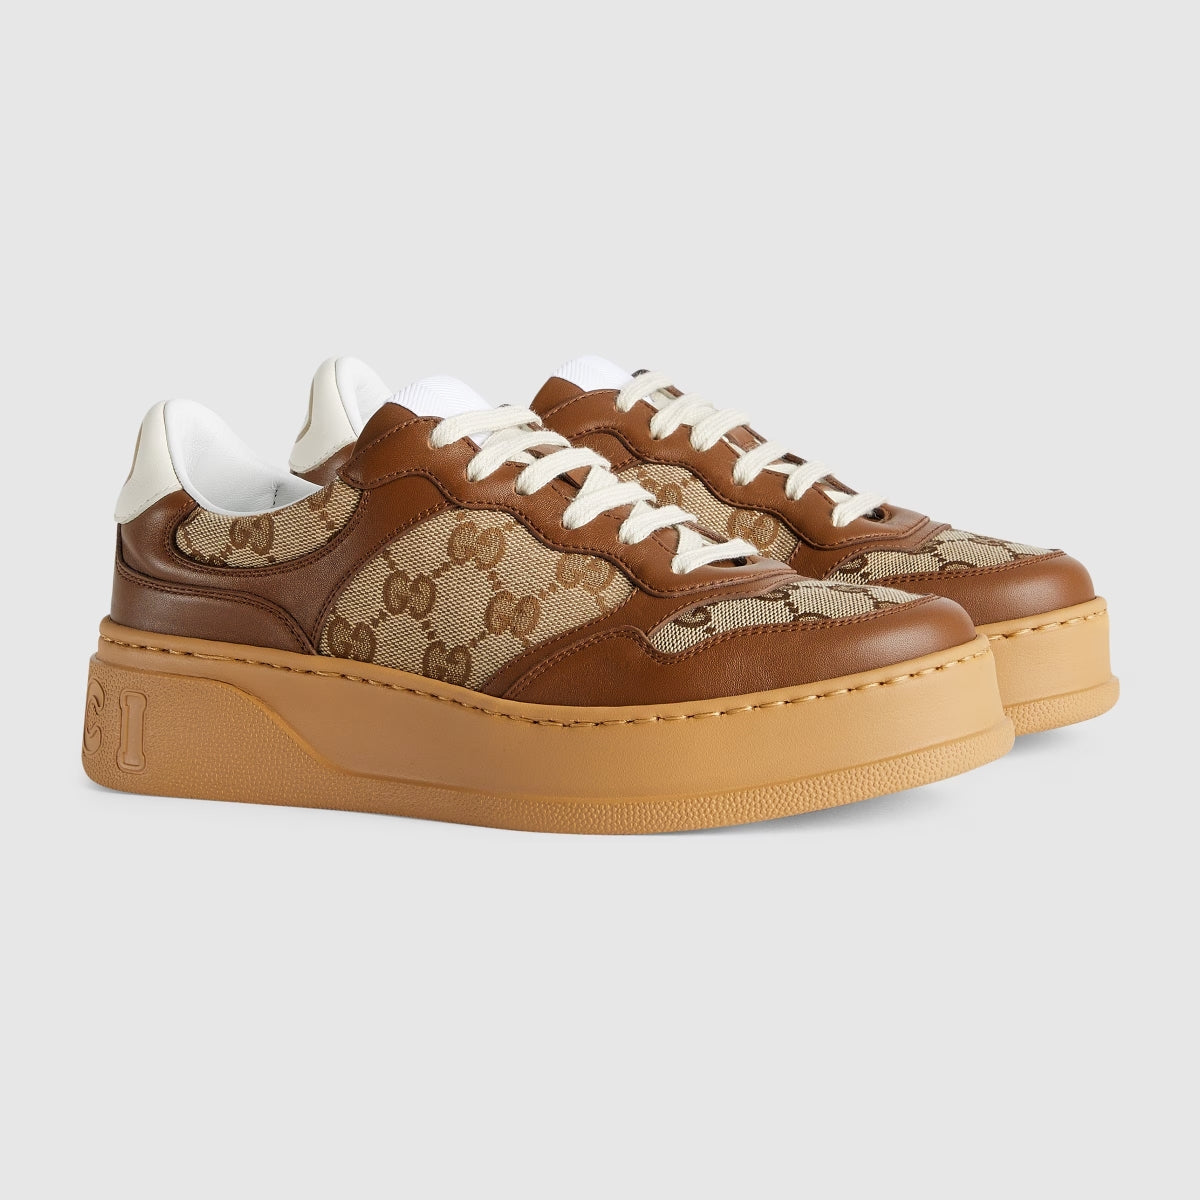 GUCCI GG TRAINER CHUNKY SNEAKER IN BROWN LEATHER AND CANVAS. Women: ‎676092 UPG20 2866, Men: 675840 UPG20 2866